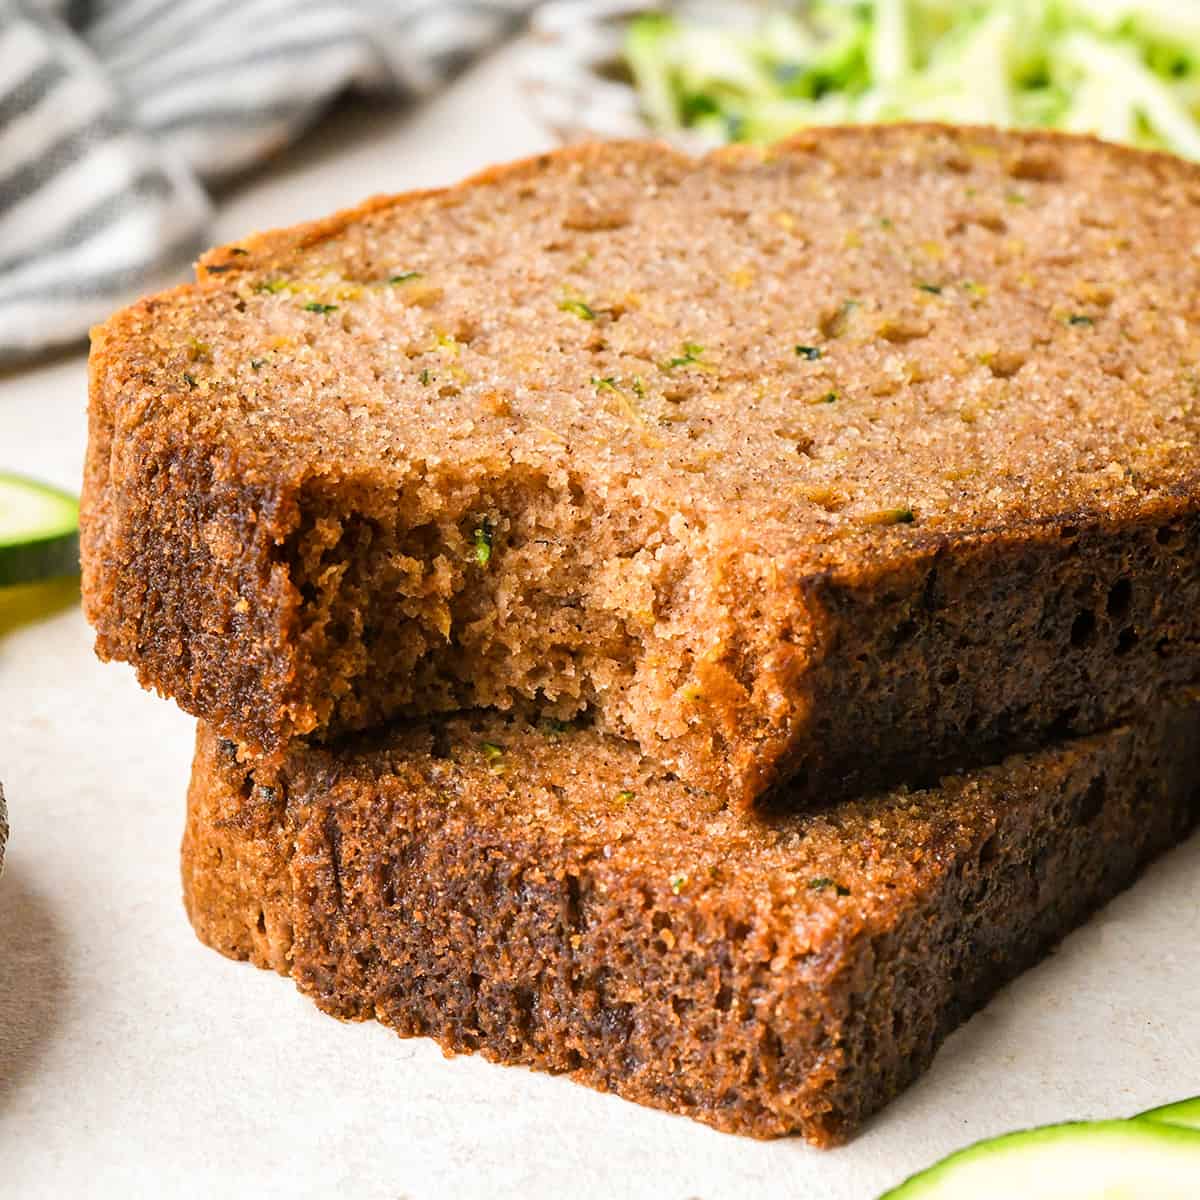 a stack of 2 slices of zucchini bread, the top one with a bite taken out of it